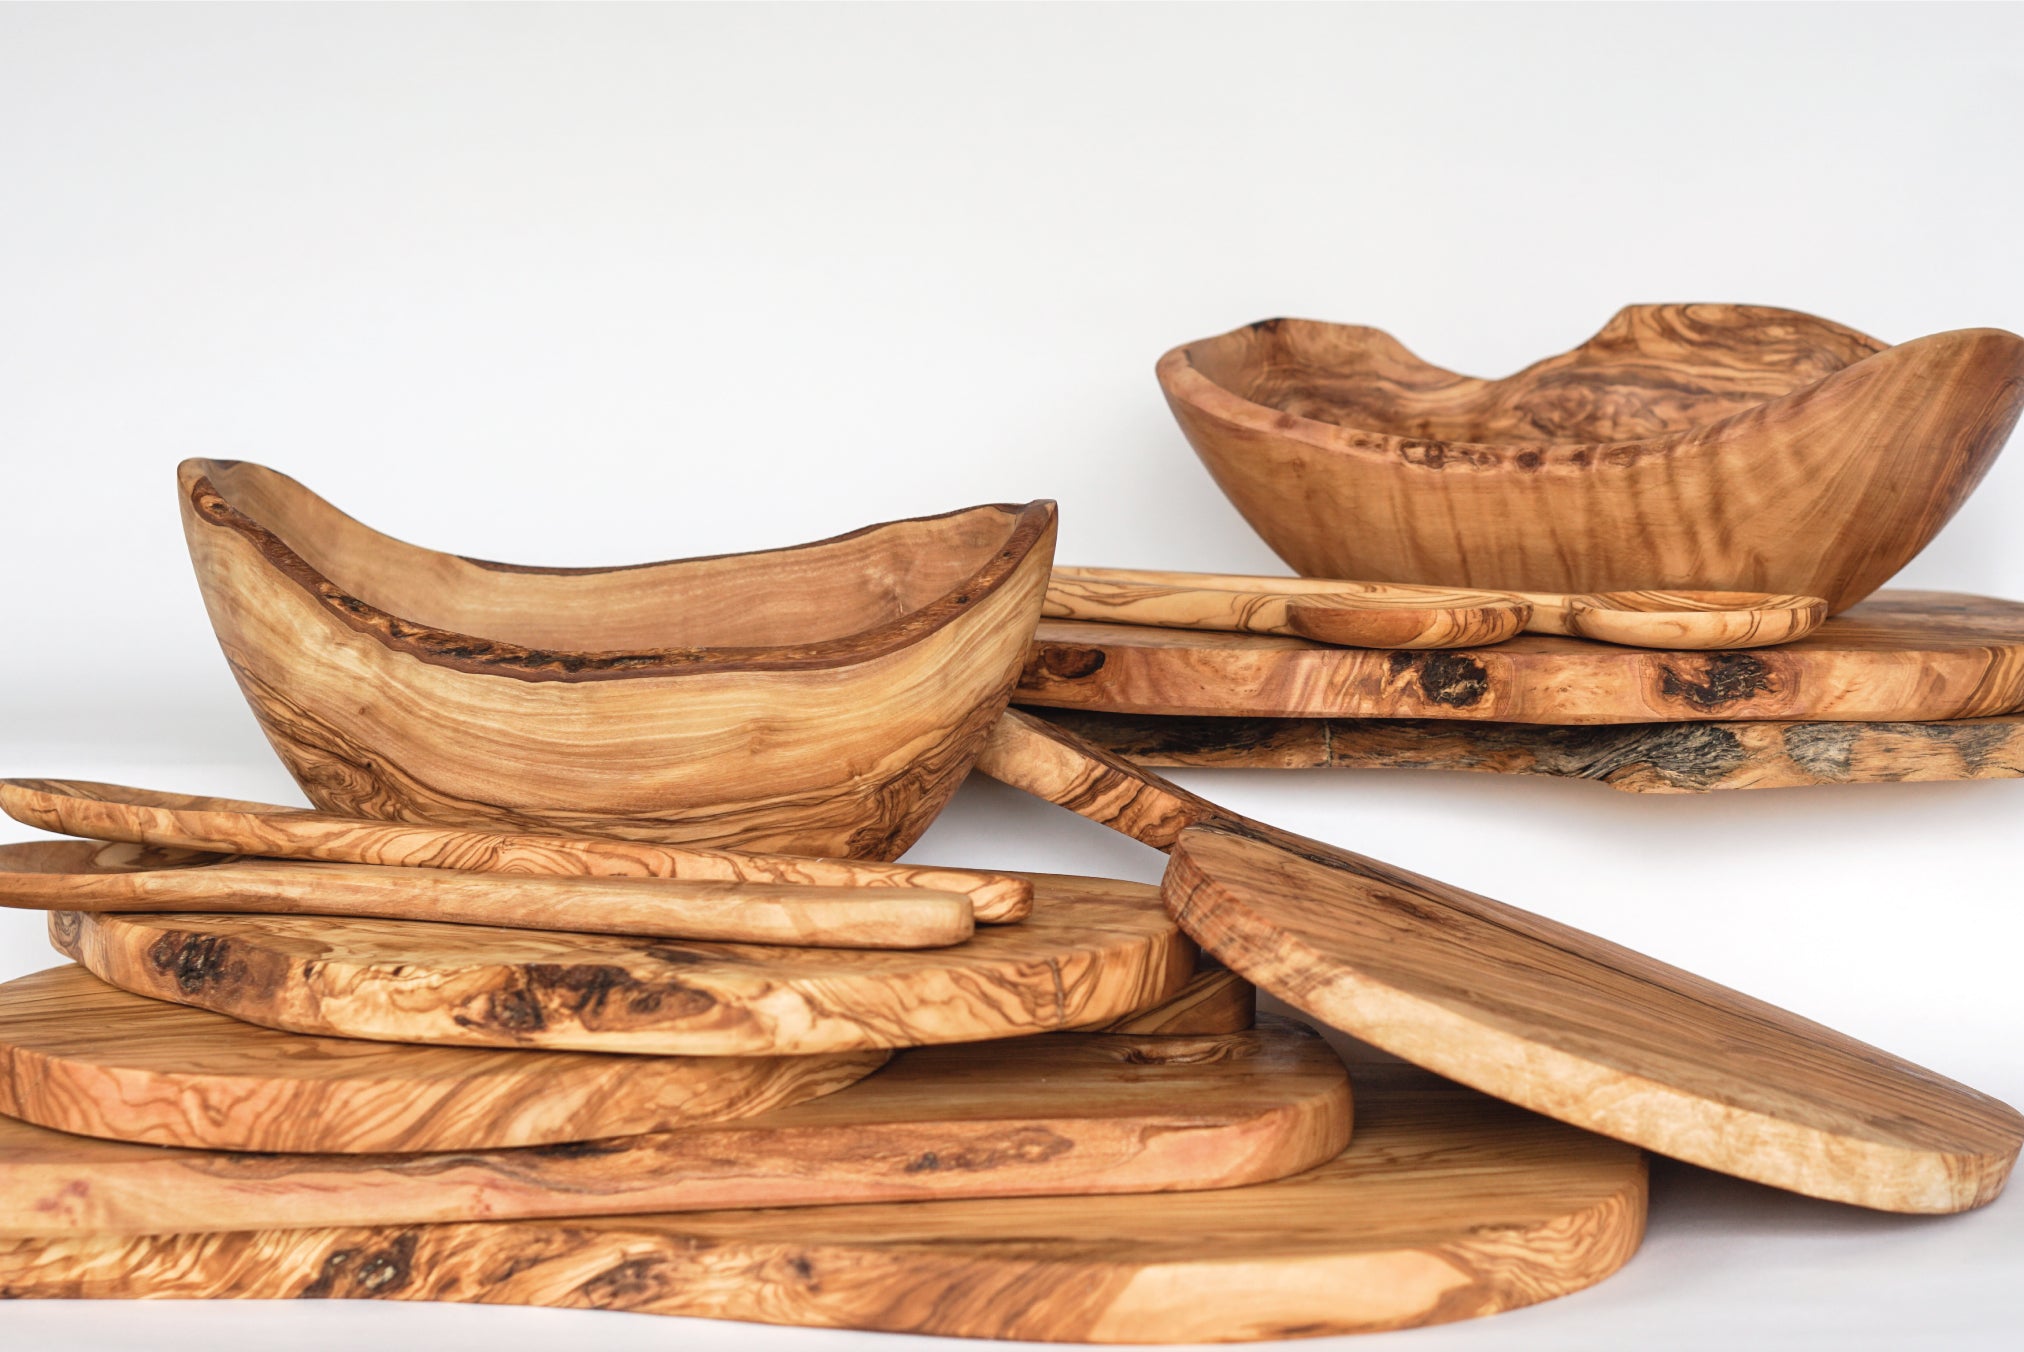 The Tunisia Collection by Fairkind, handcrafted luxury olive wood kitchenware, serving boards and spoons. Handmade by master artisans around the world